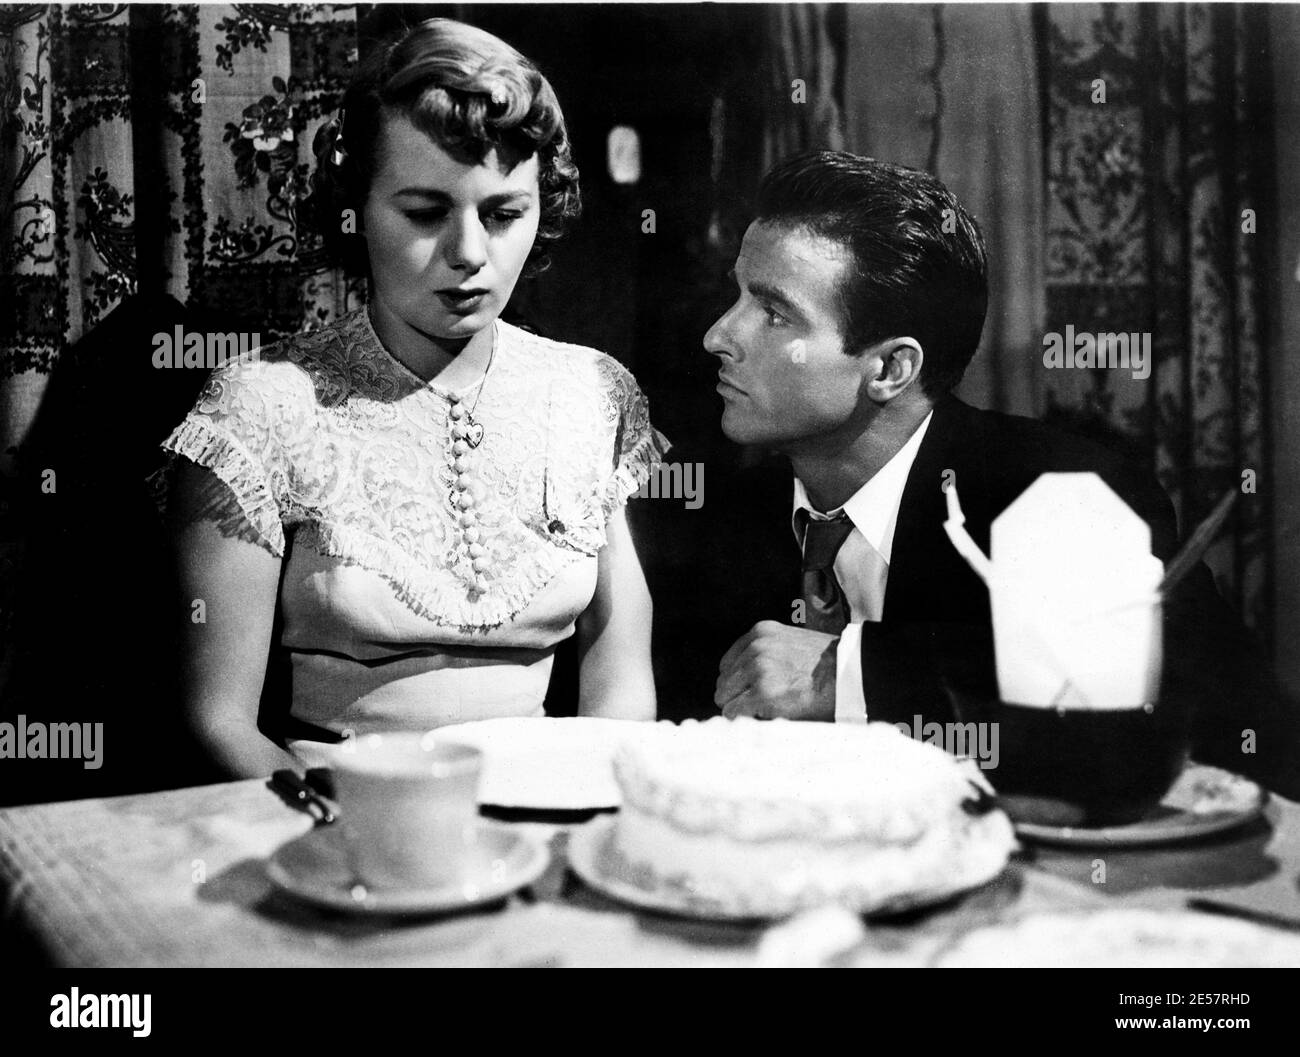 1951. : The movie actress SHELLEY WINTERS ( 1922  - 2006 ) with MONTGOMERY CLIFT (1920 - 1966 ) in A PLACE IN THE SUN ( Un posto al sole - Una tragedia americana ) by George Stevens from a novel by Theodore dreiser and the play from Patrick Kearney .  Shelley Winters was the first wife of italian stage and movie actor VITTORIO GASSMAN , photo by Paramount Pictures Studios - CINEMA - FILM  - blondie - capelli biondi - bionda - blonde hair  - profilo - profile   ----  ARCHIVIO GBB Stock Photo